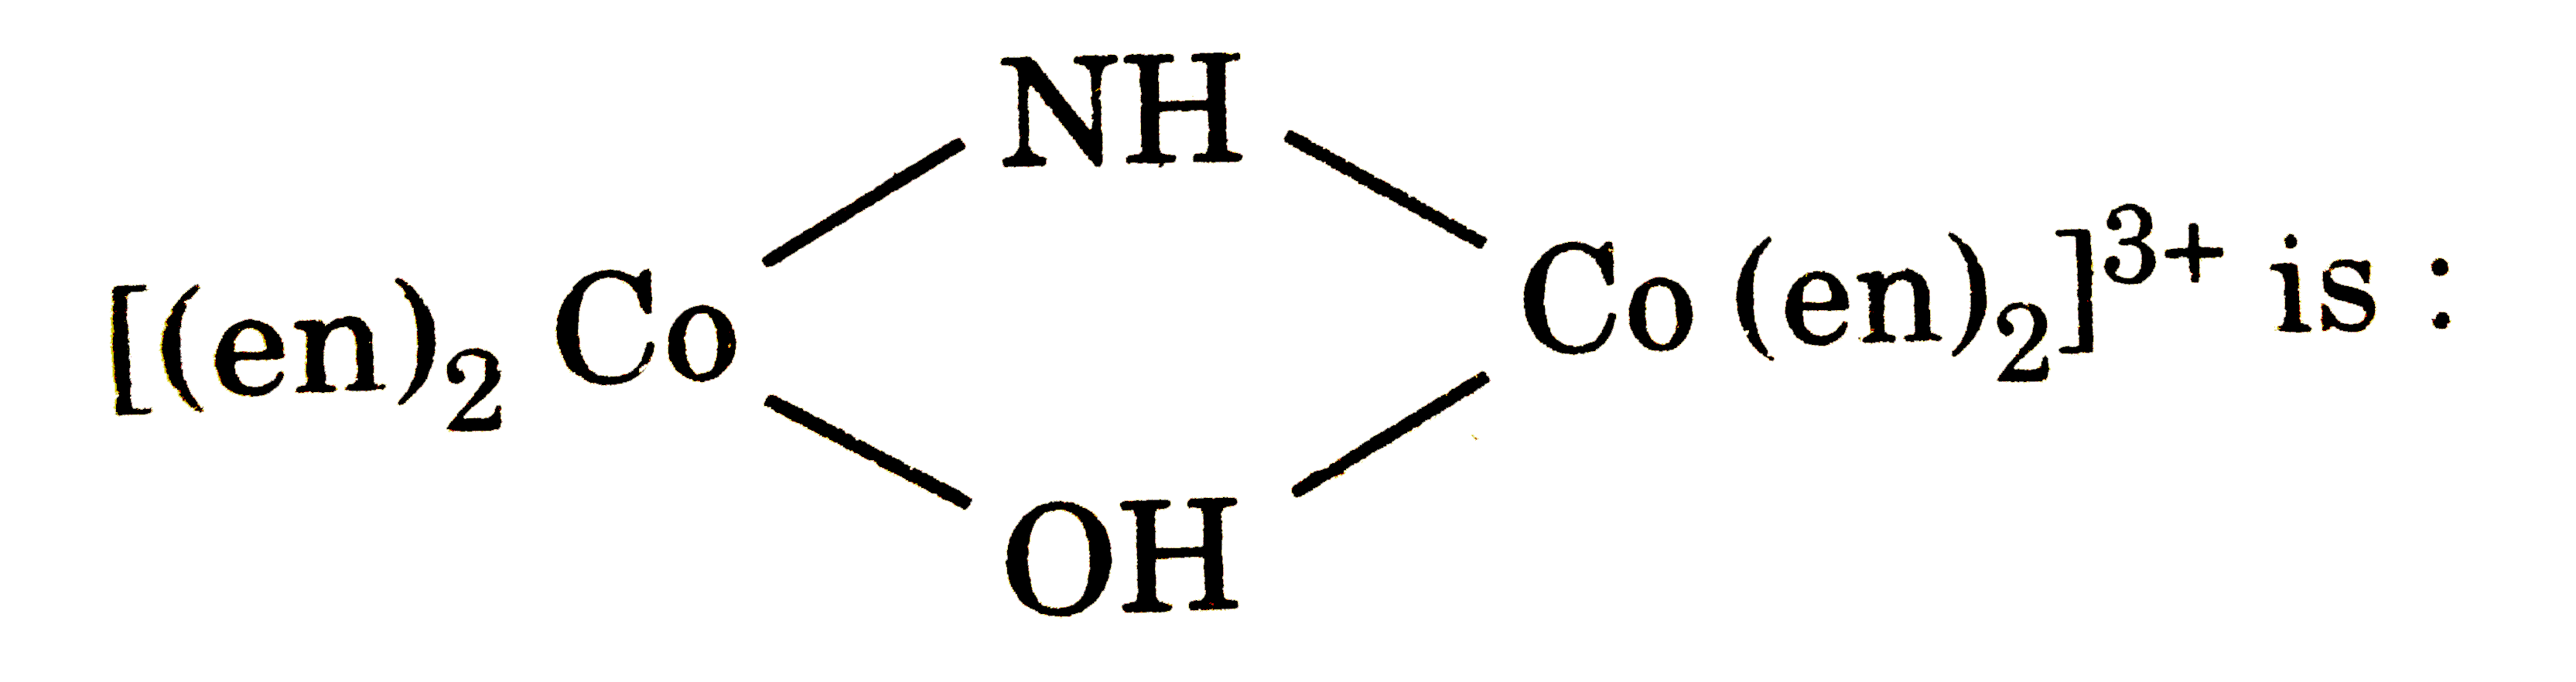 The oxidation number of Co in the complex ion